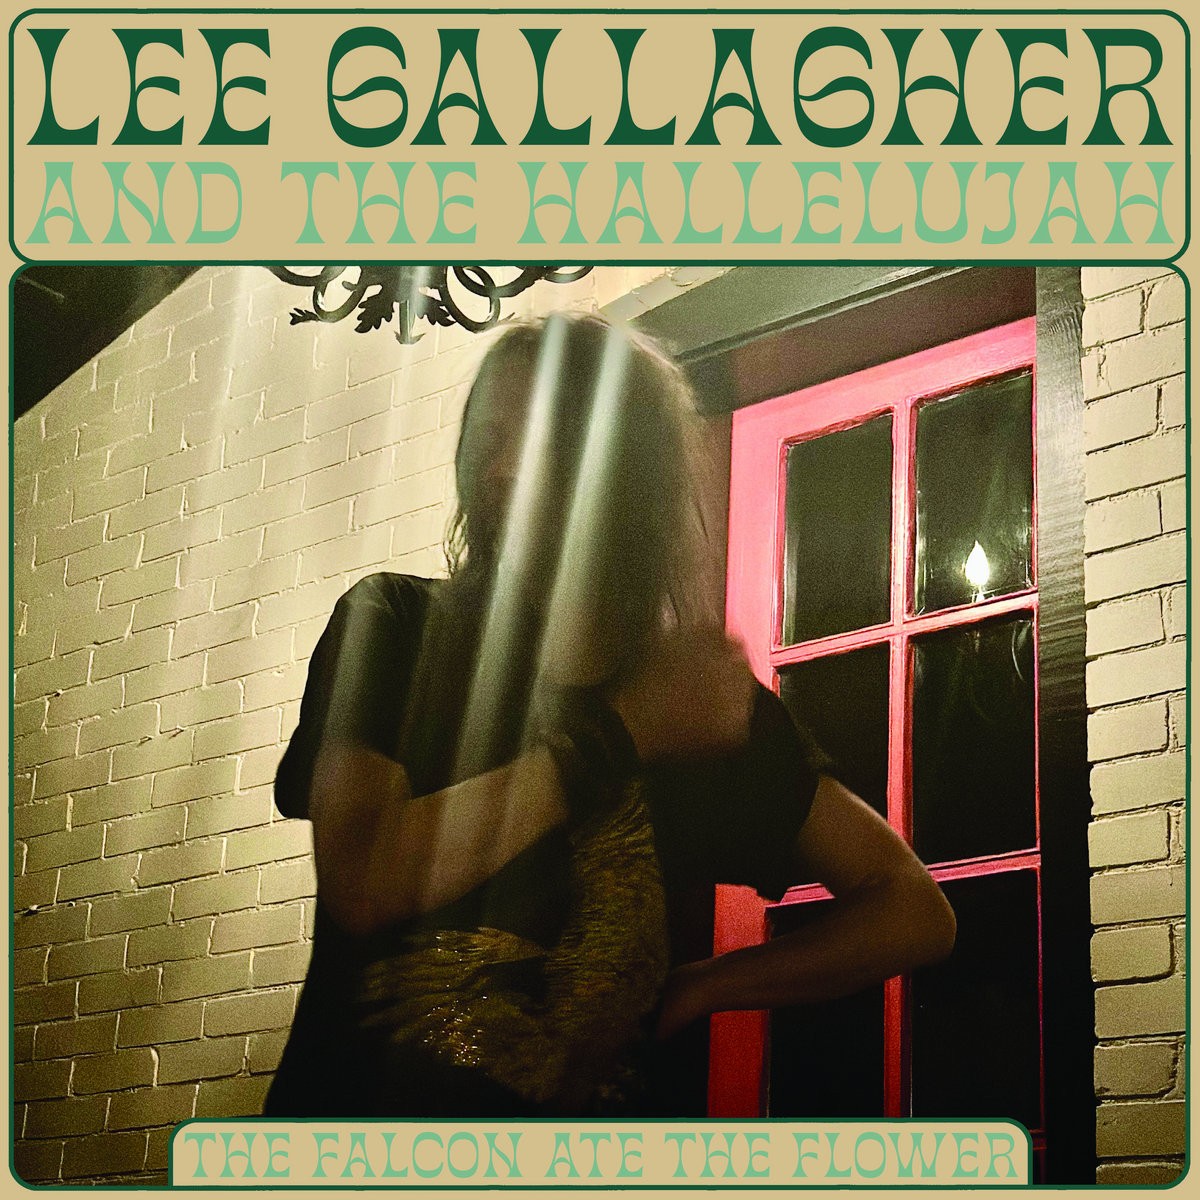 Lee Gallagher & The Hallelujah - The Falcon Ate The Flower